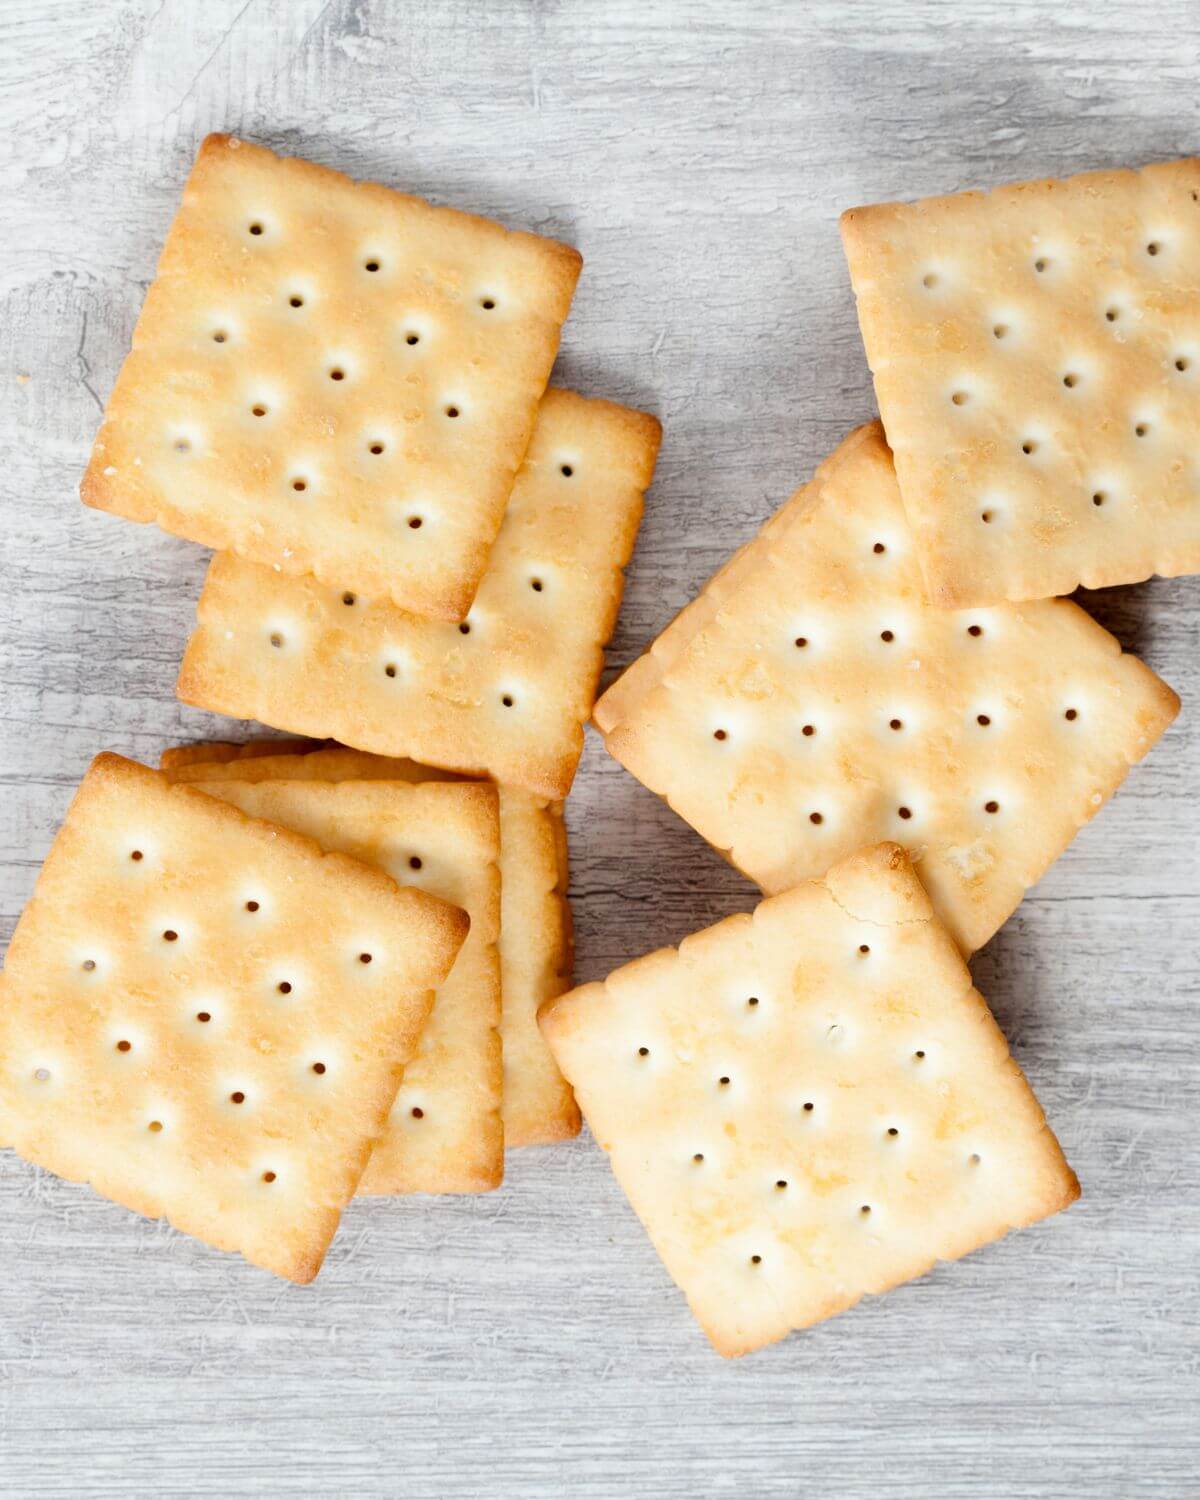 Crackers for the toffee candy.